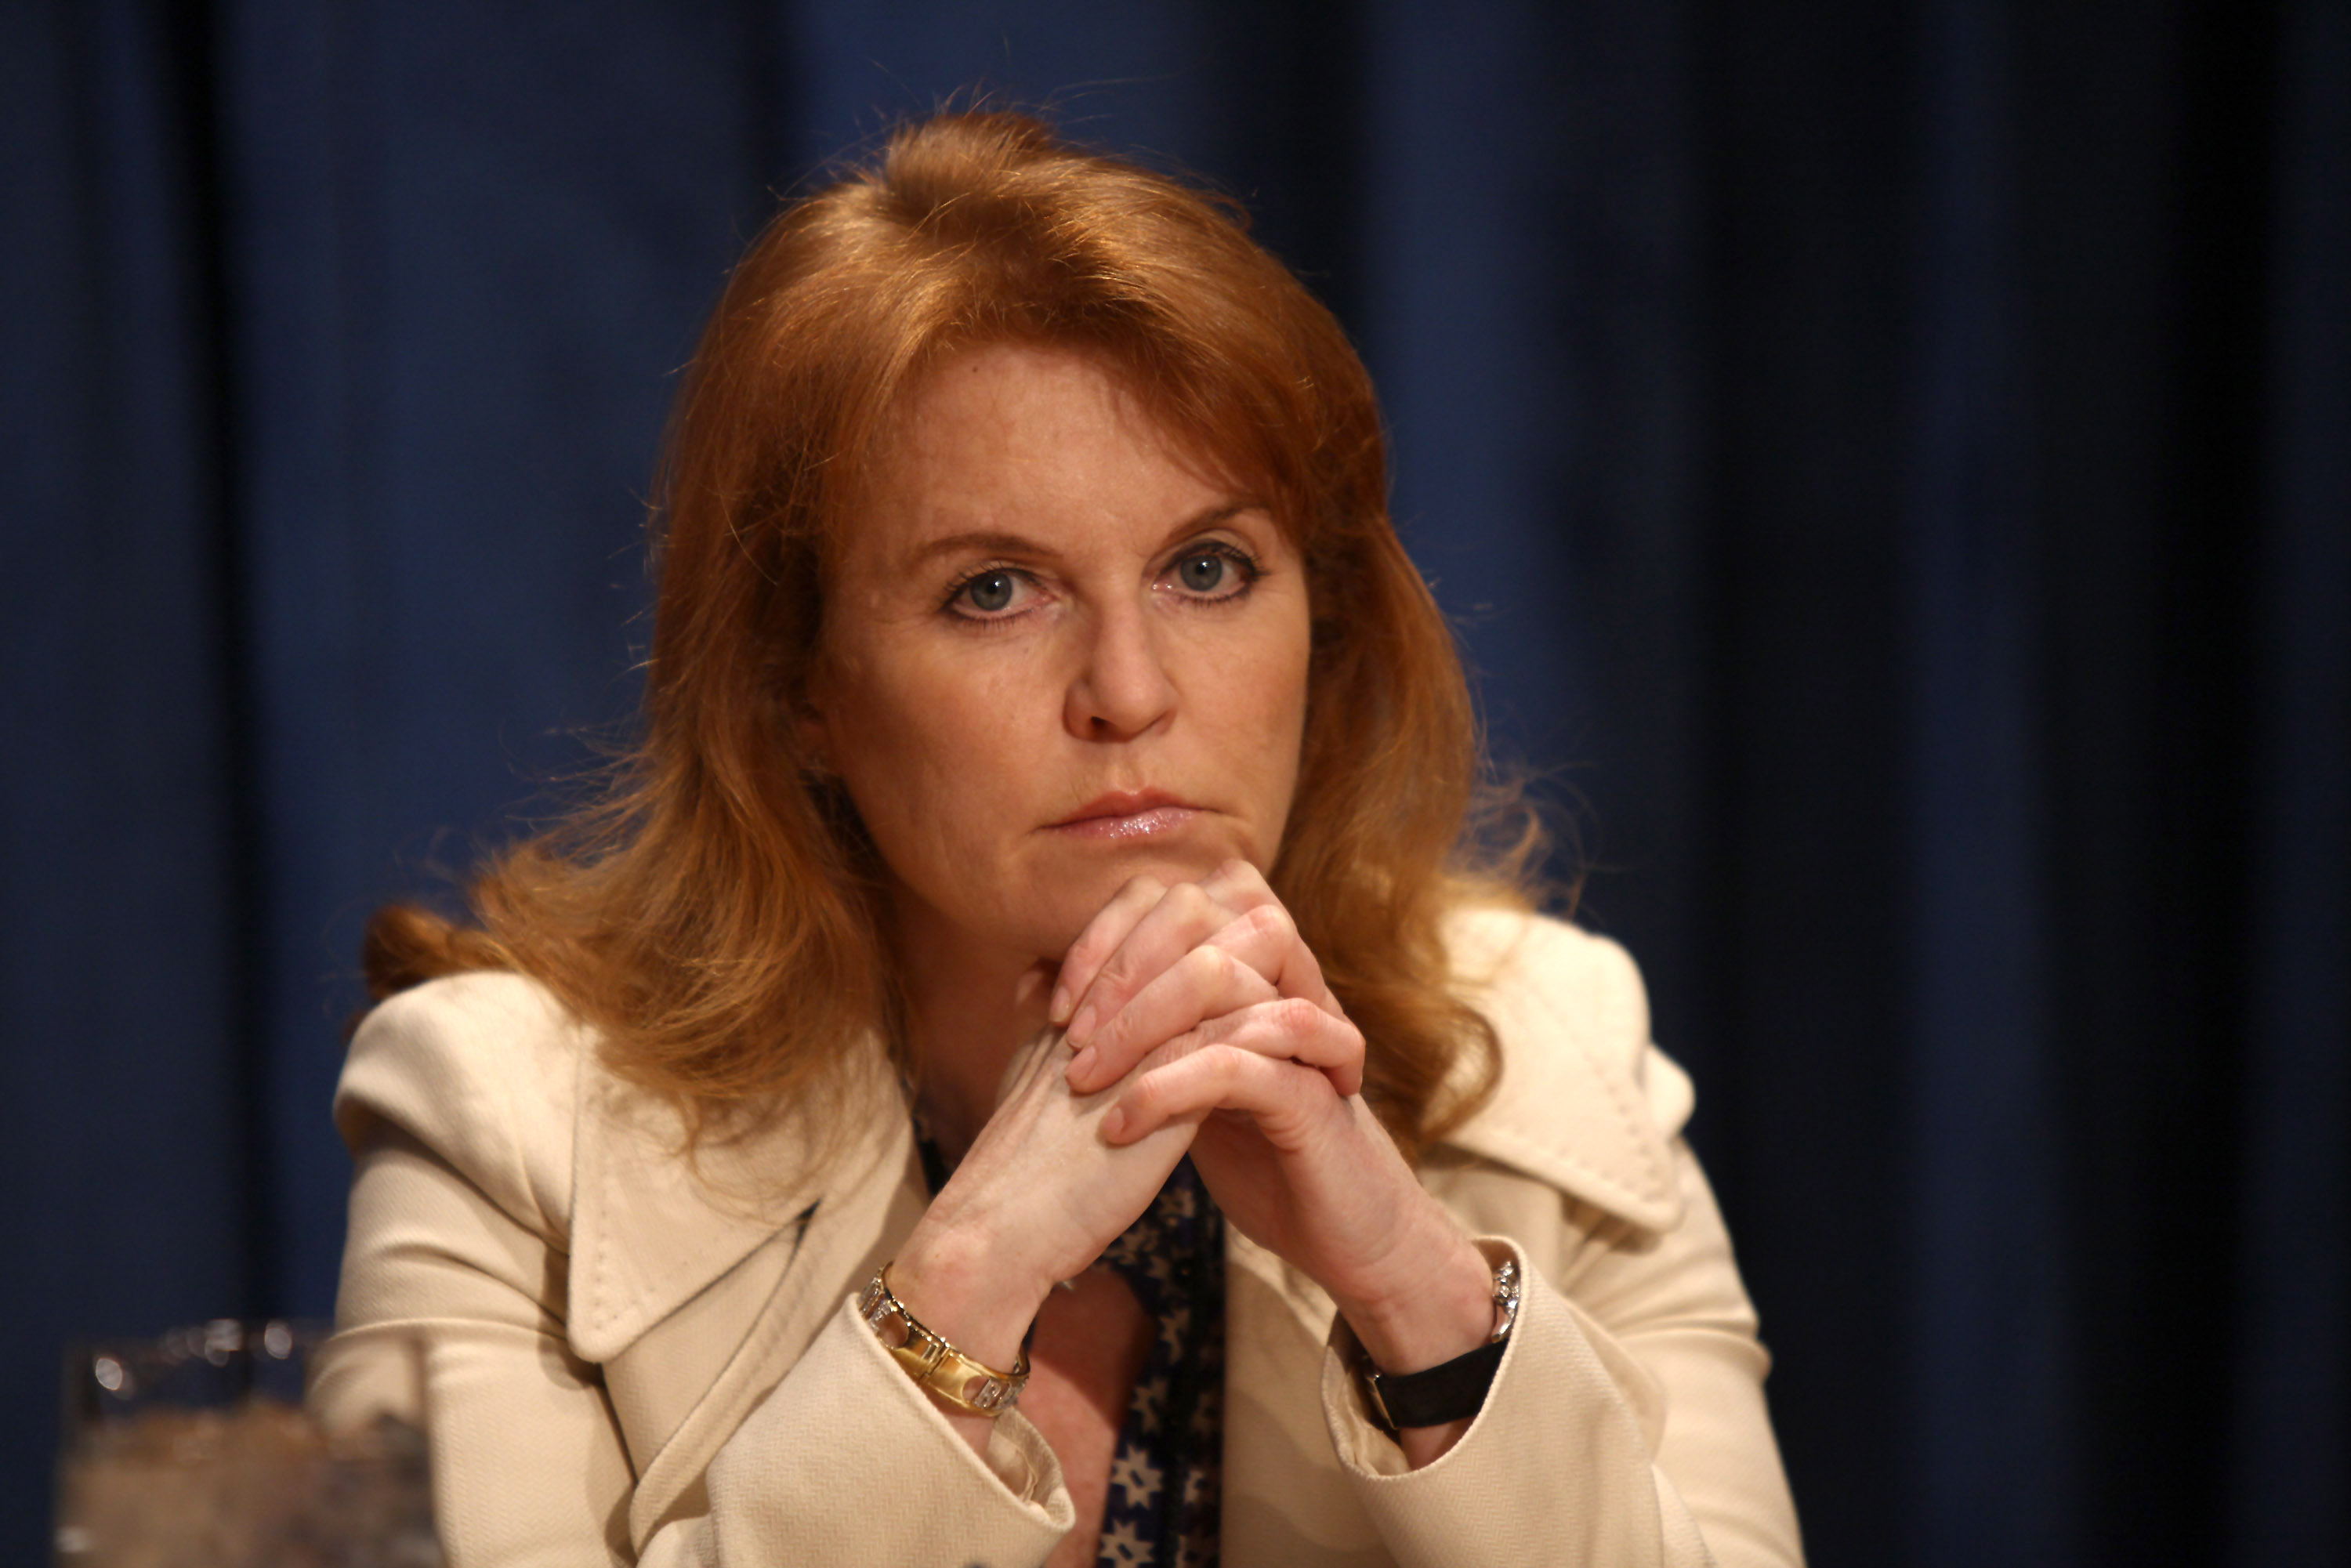 Duchess of York Sarah Ferguson at "Engaging Philanthropy" to promote gender equality and women's empowerment at the United Nations on February 22, 2010, in New York City | Source: Getty Images